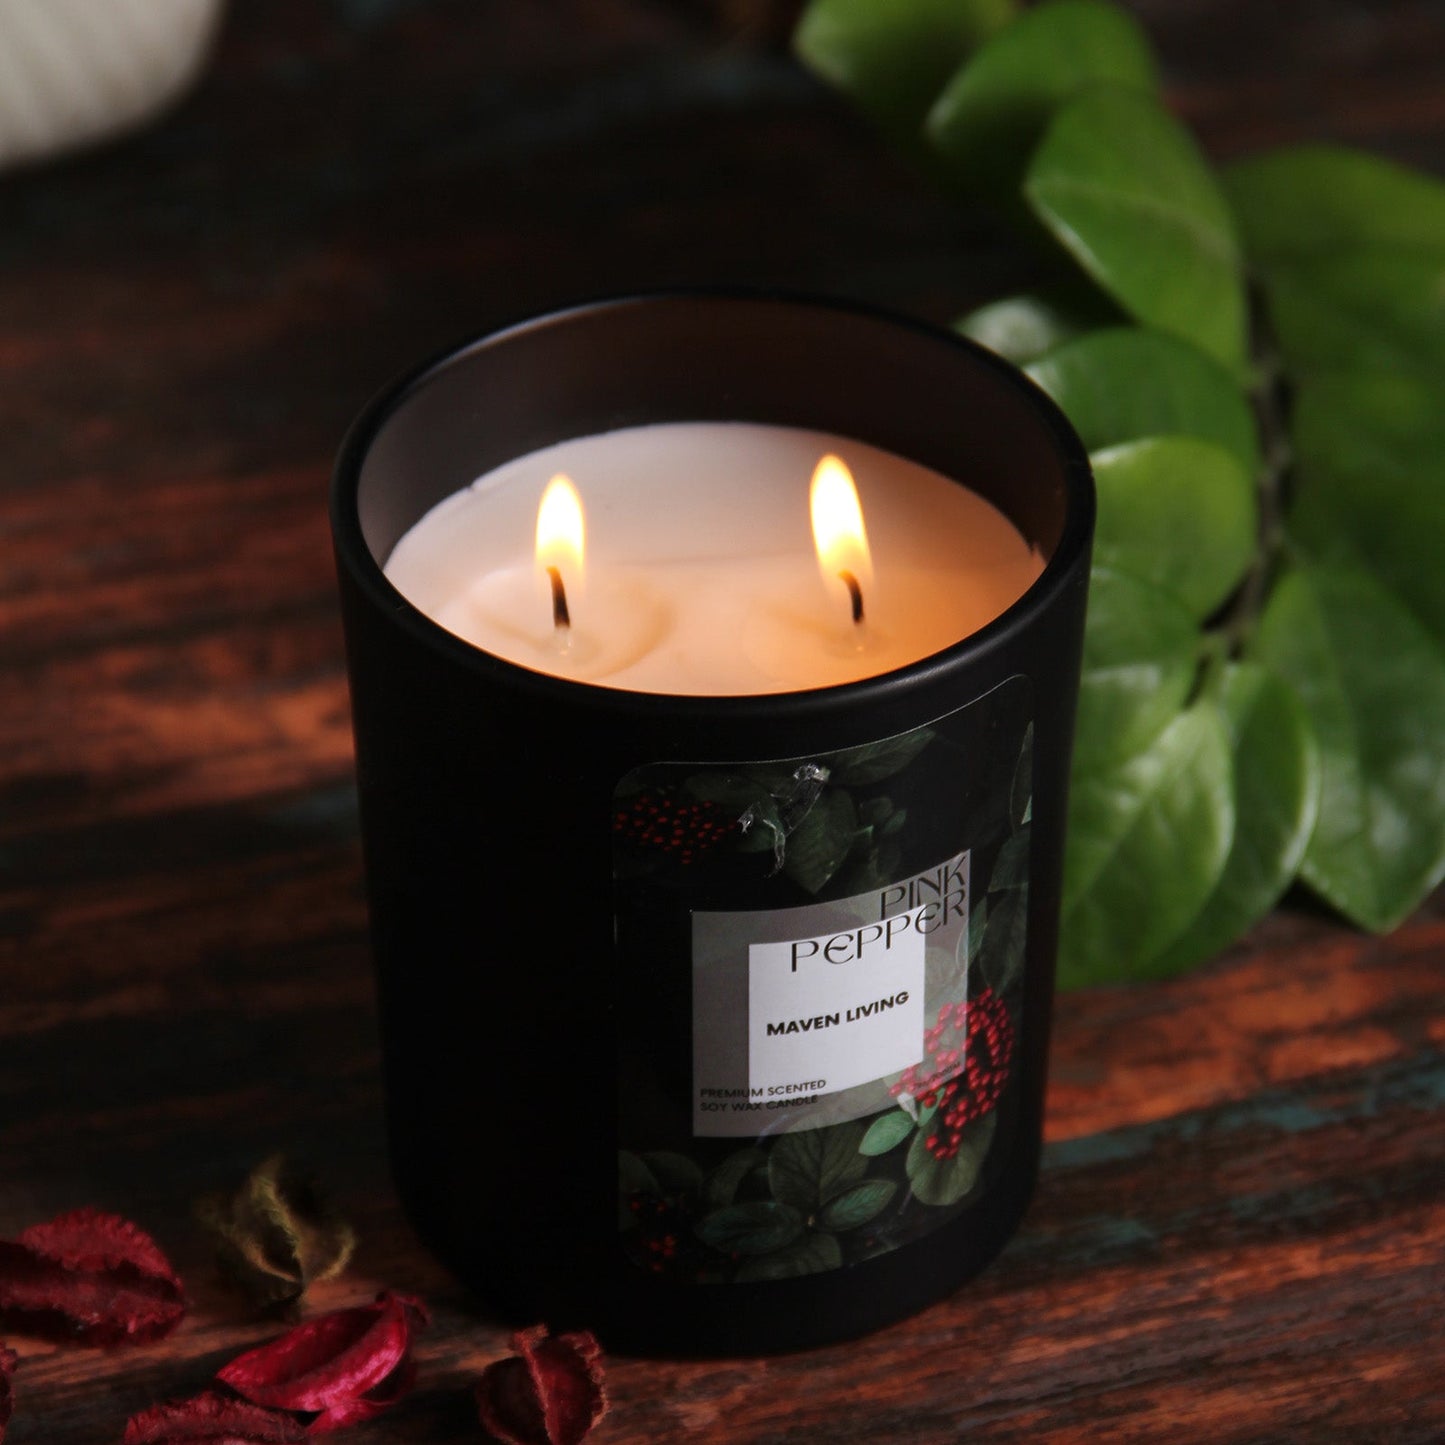 Pink pepper scented candle